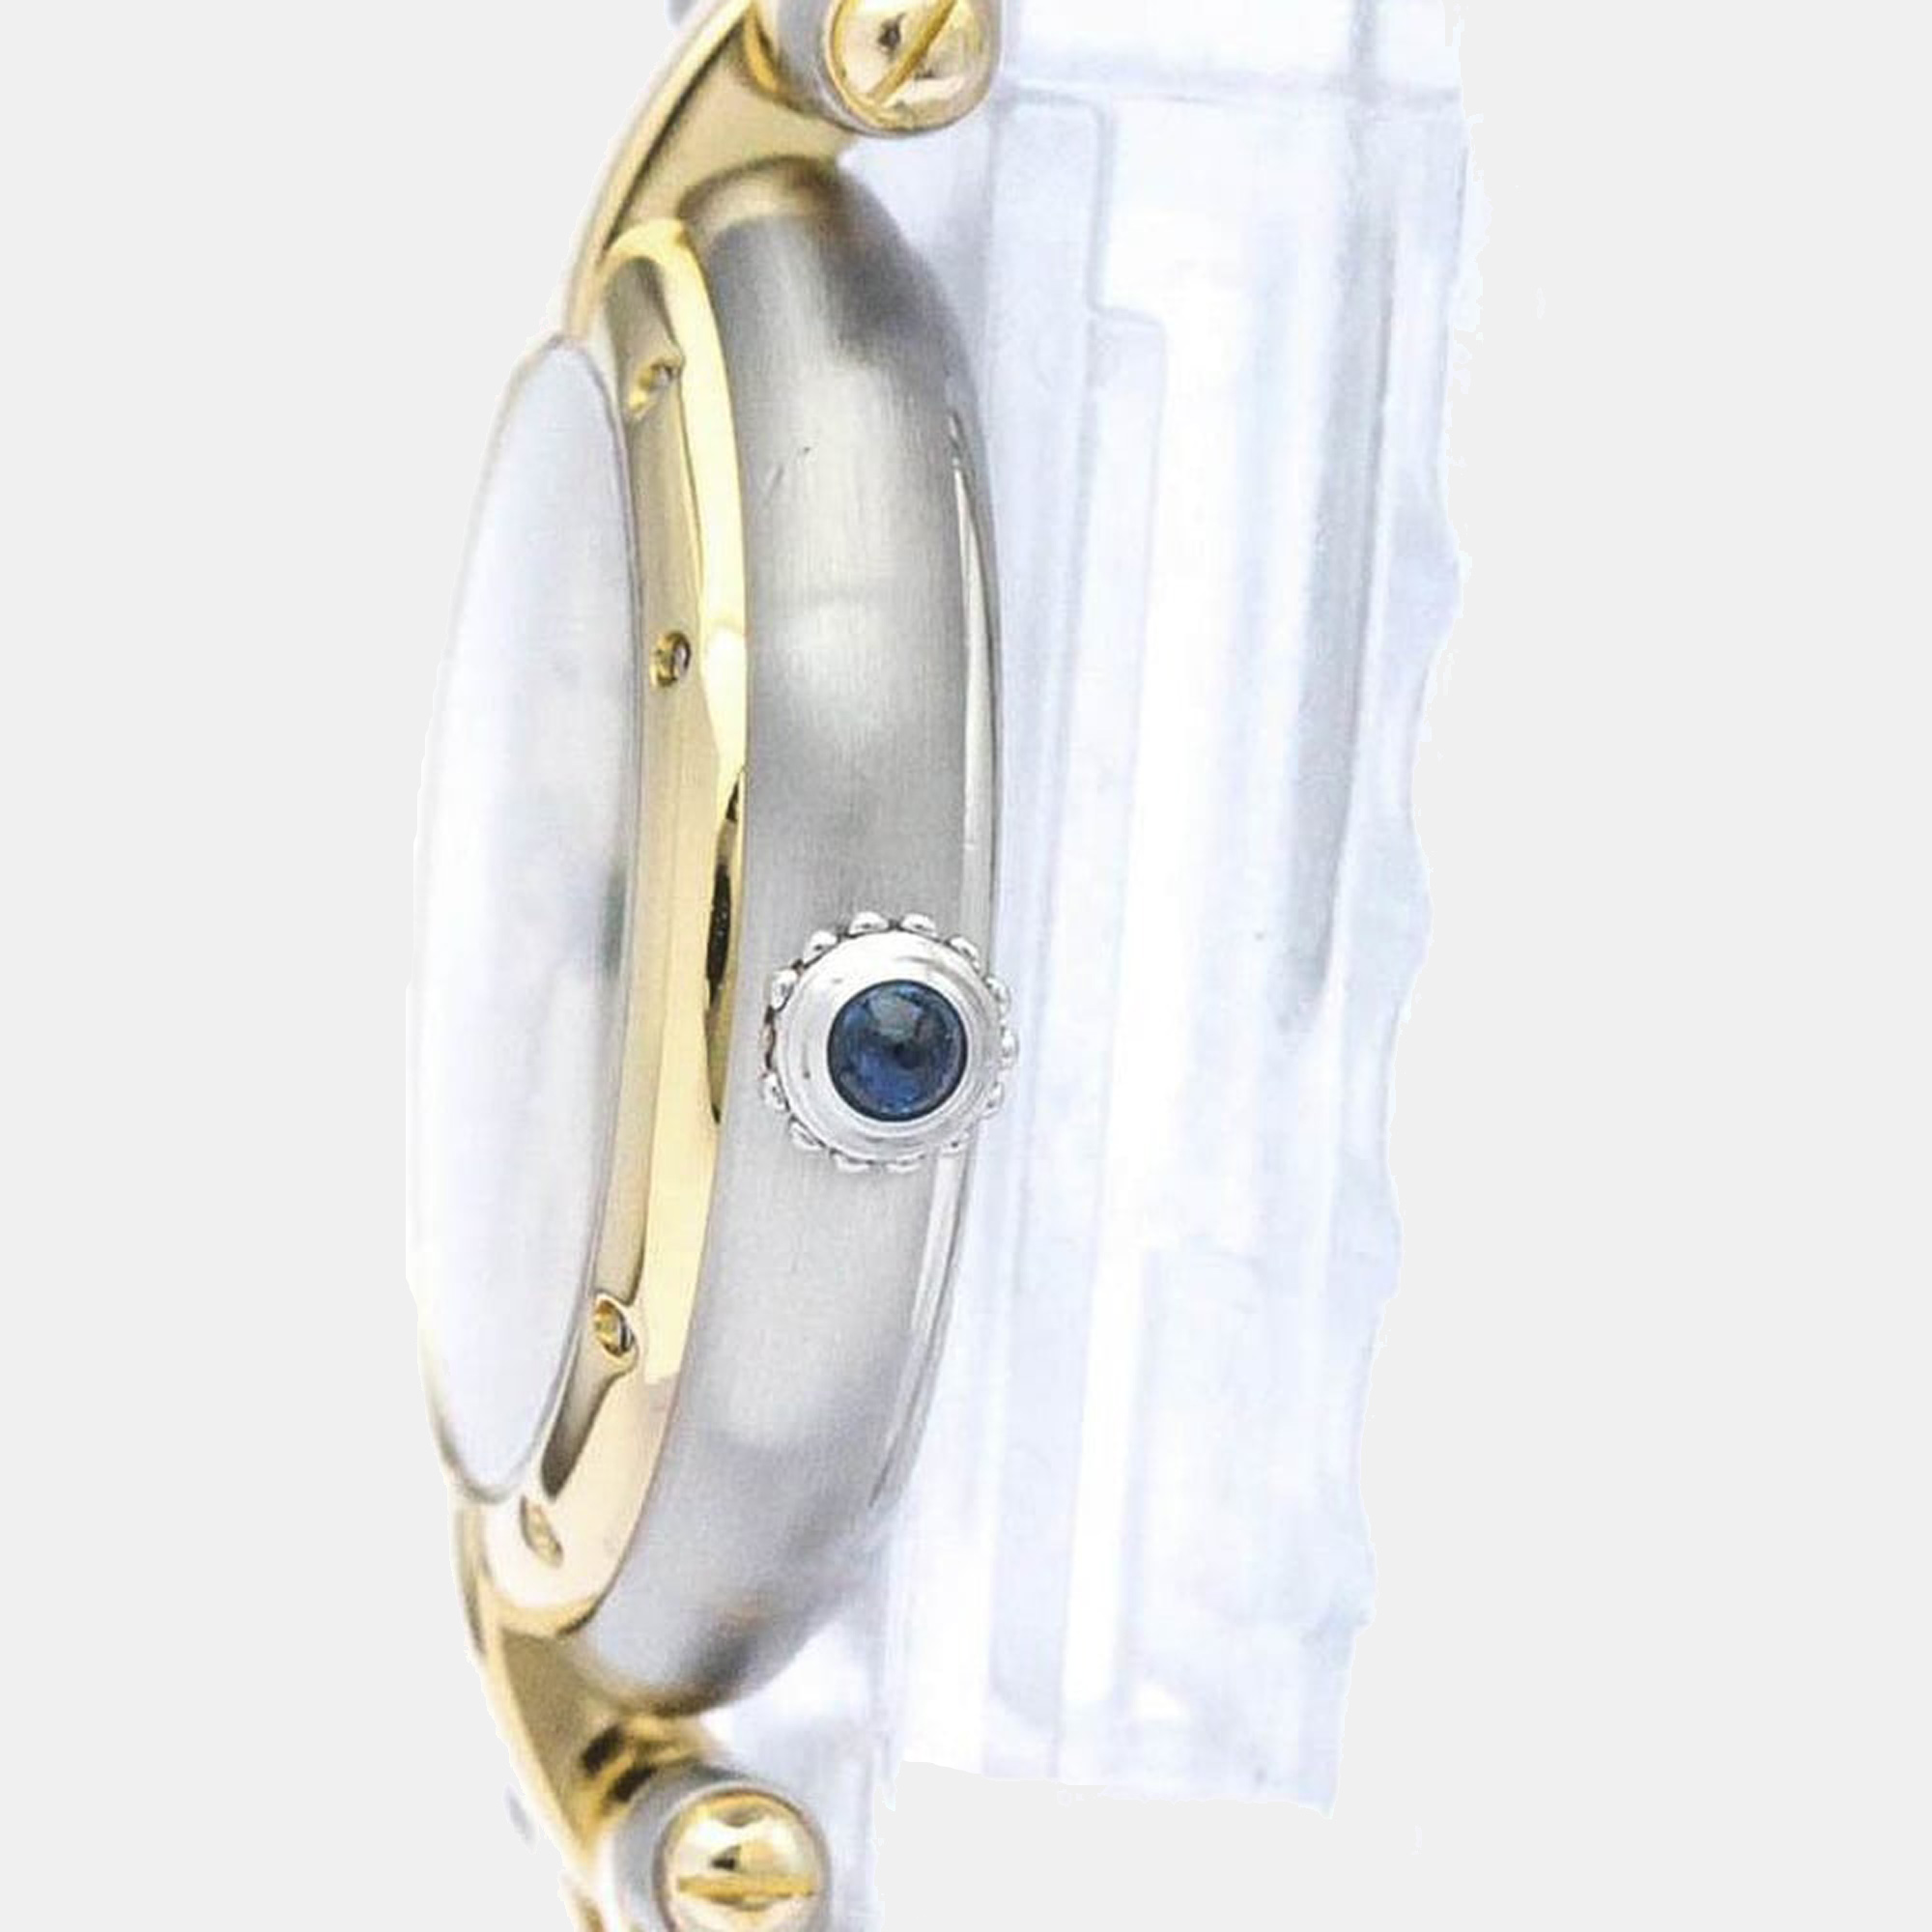 

Cartier Silver 18K Yellow Gold And Stainless Steel Panthere Cougar Quartz Women's Wristwatch 24 mm